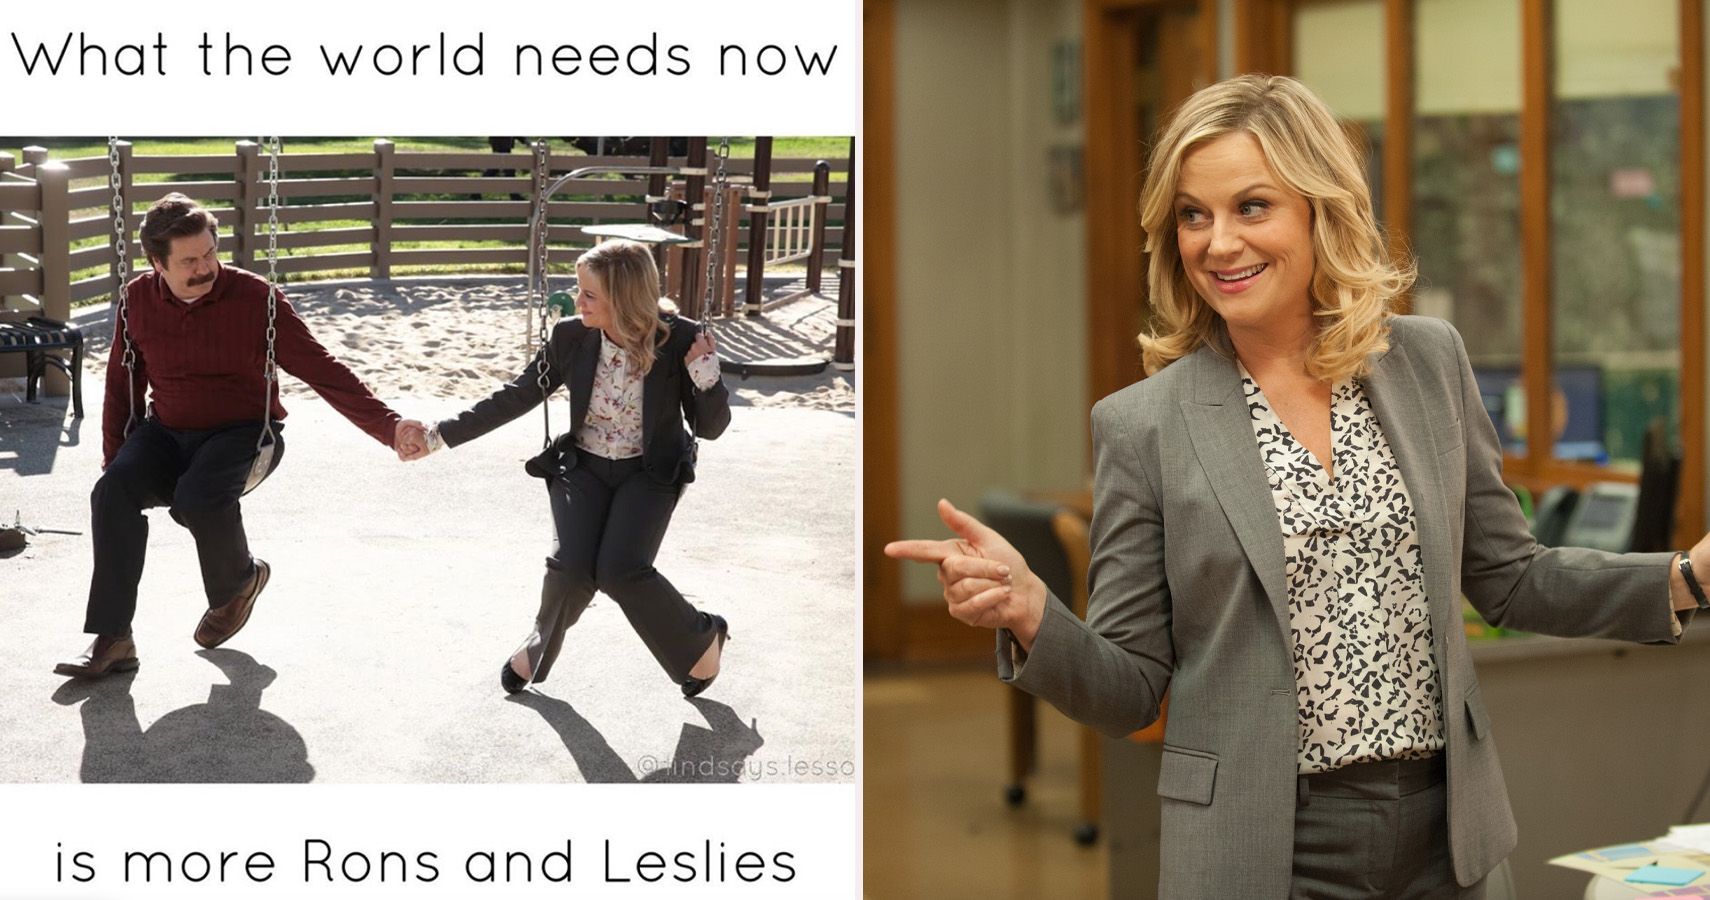 Parks and Rec Inspired Leslie Knope Friends, Waffles, Work